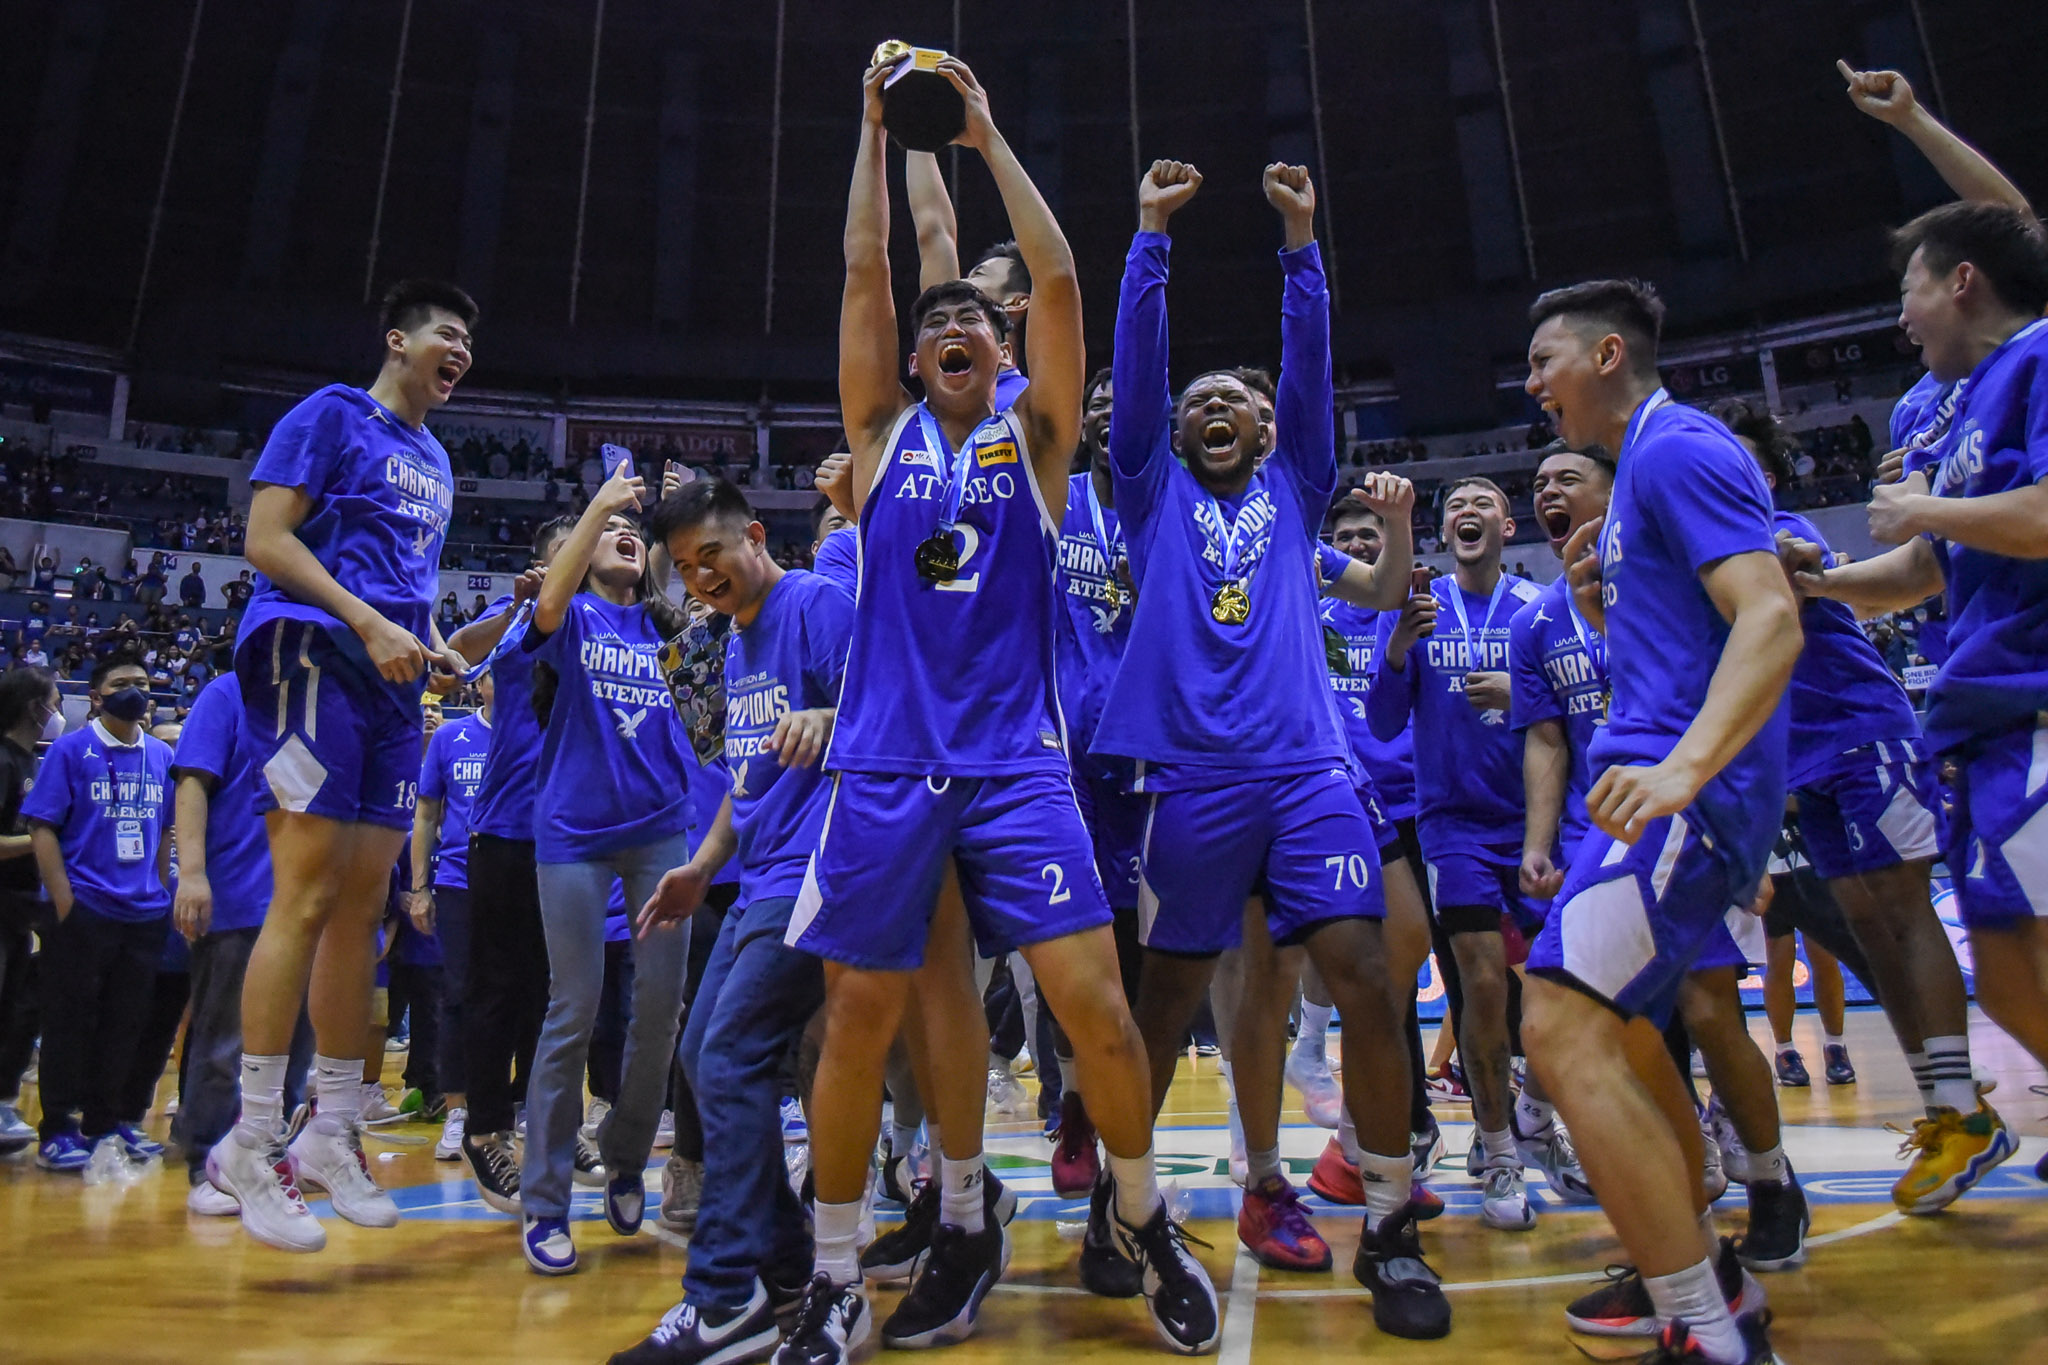 Ateneo edges UP in thrilling finale, regains UAAP crown